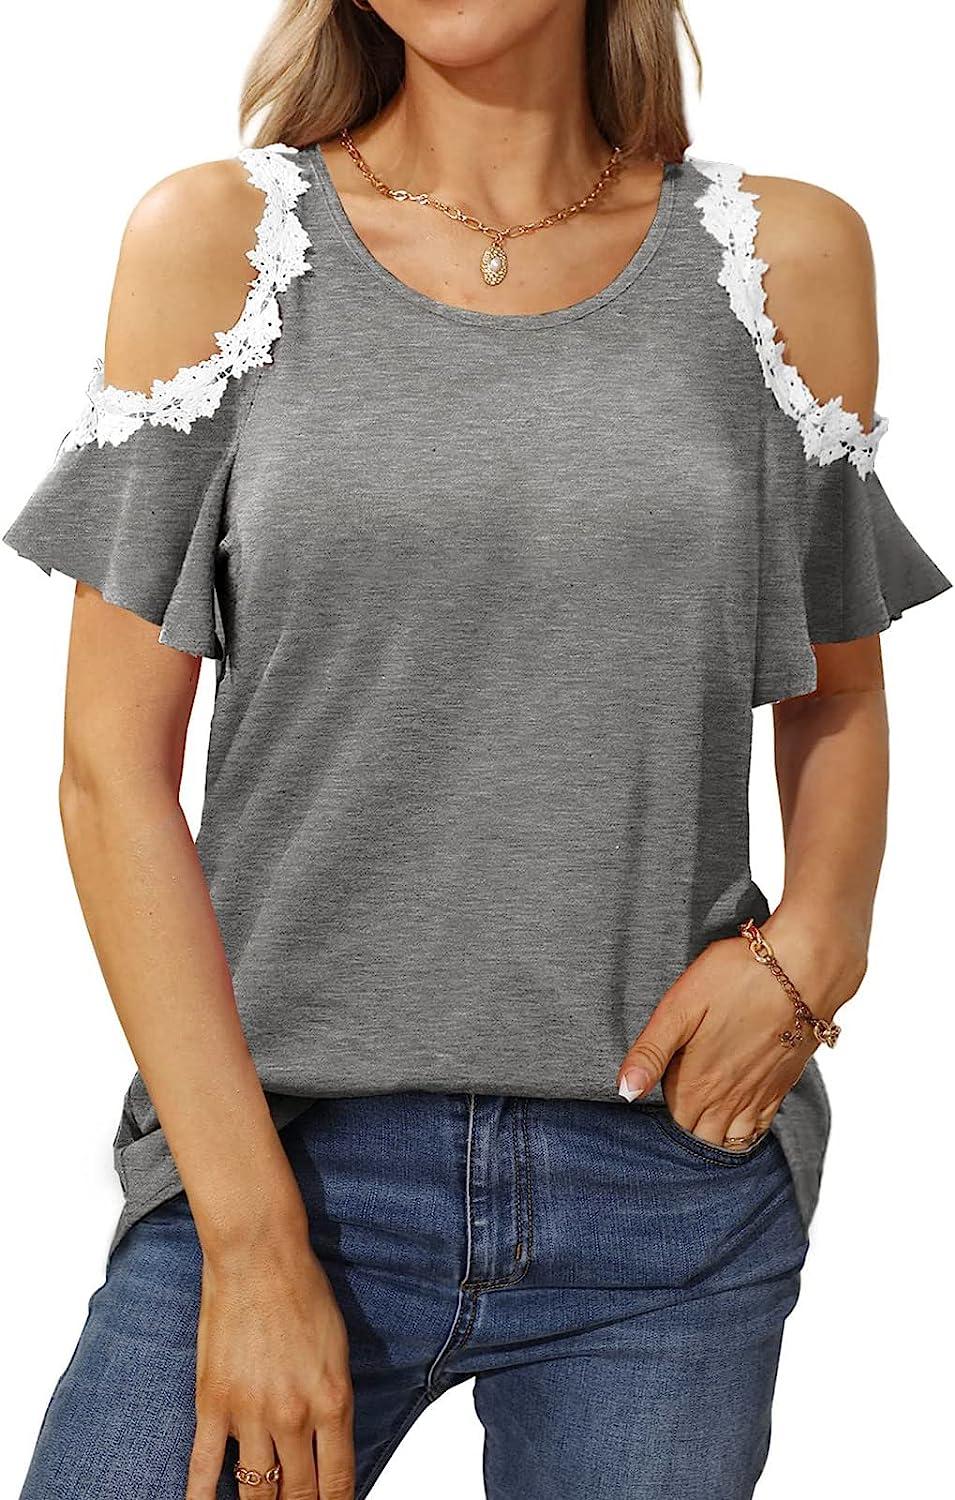 Summer Tops for Women Sexy Cold Shoulder Plus Size Tops Casual Solid Round  Neck T Shirts Cute Lace Blouses Tops Large Gray